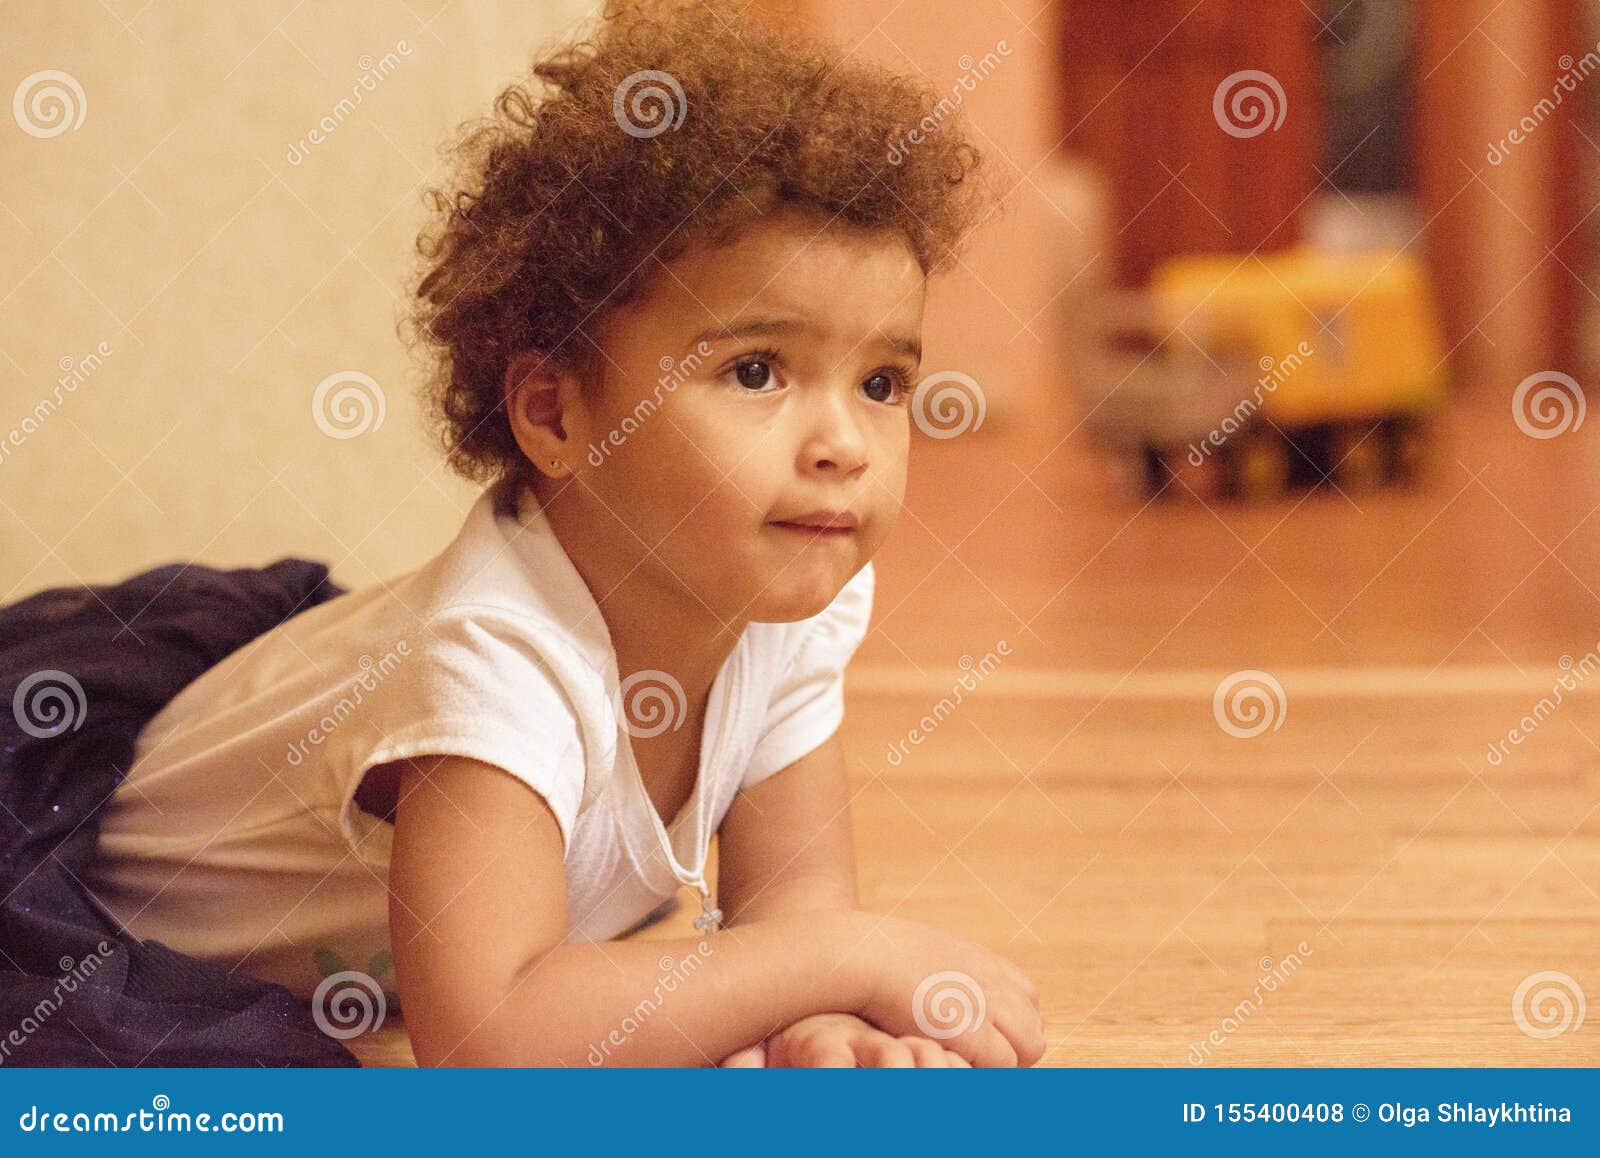 Little African American Cute Girl Laying On Floor With Smile Emotion On Face Isolated On White